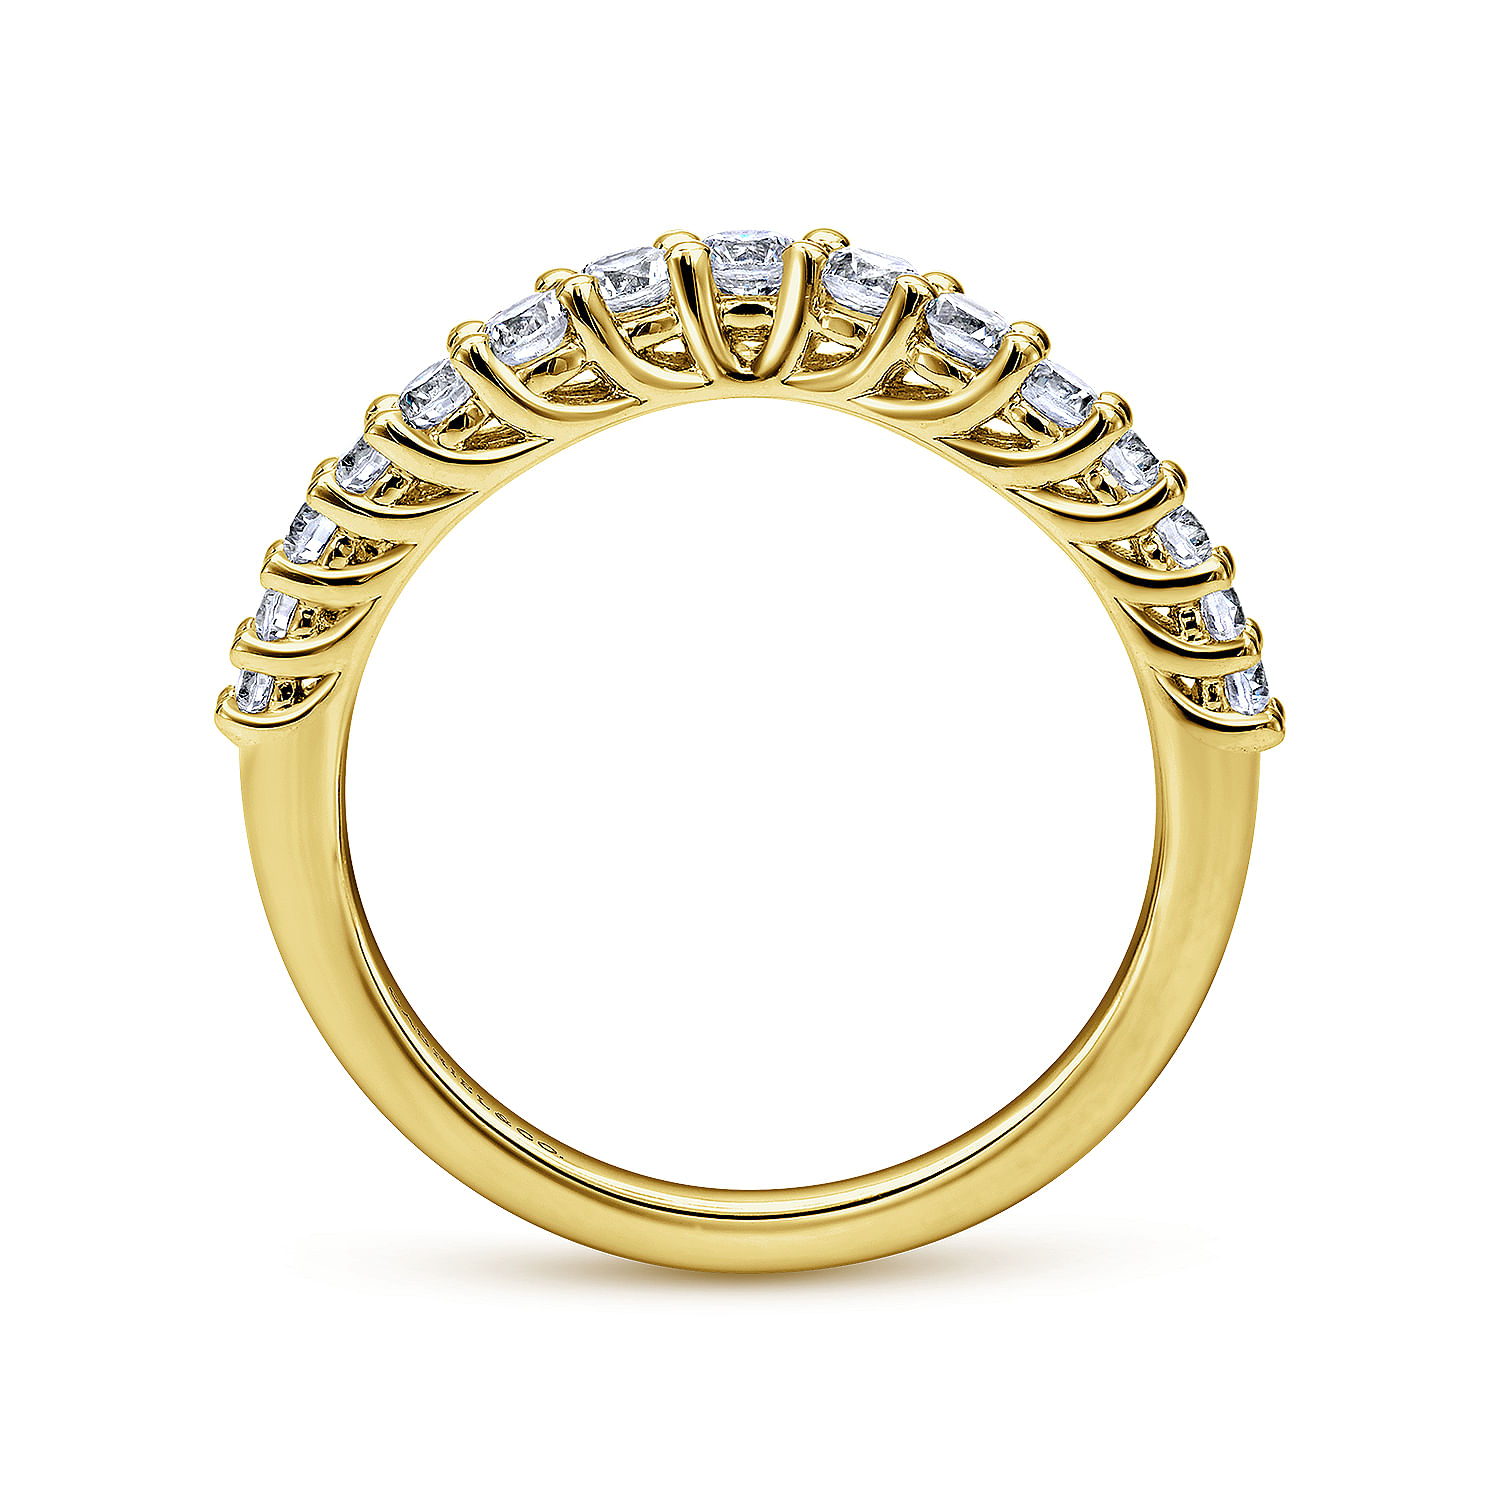 Curved 14K Yellow Gold Shared Prong Diamond Wedding Band